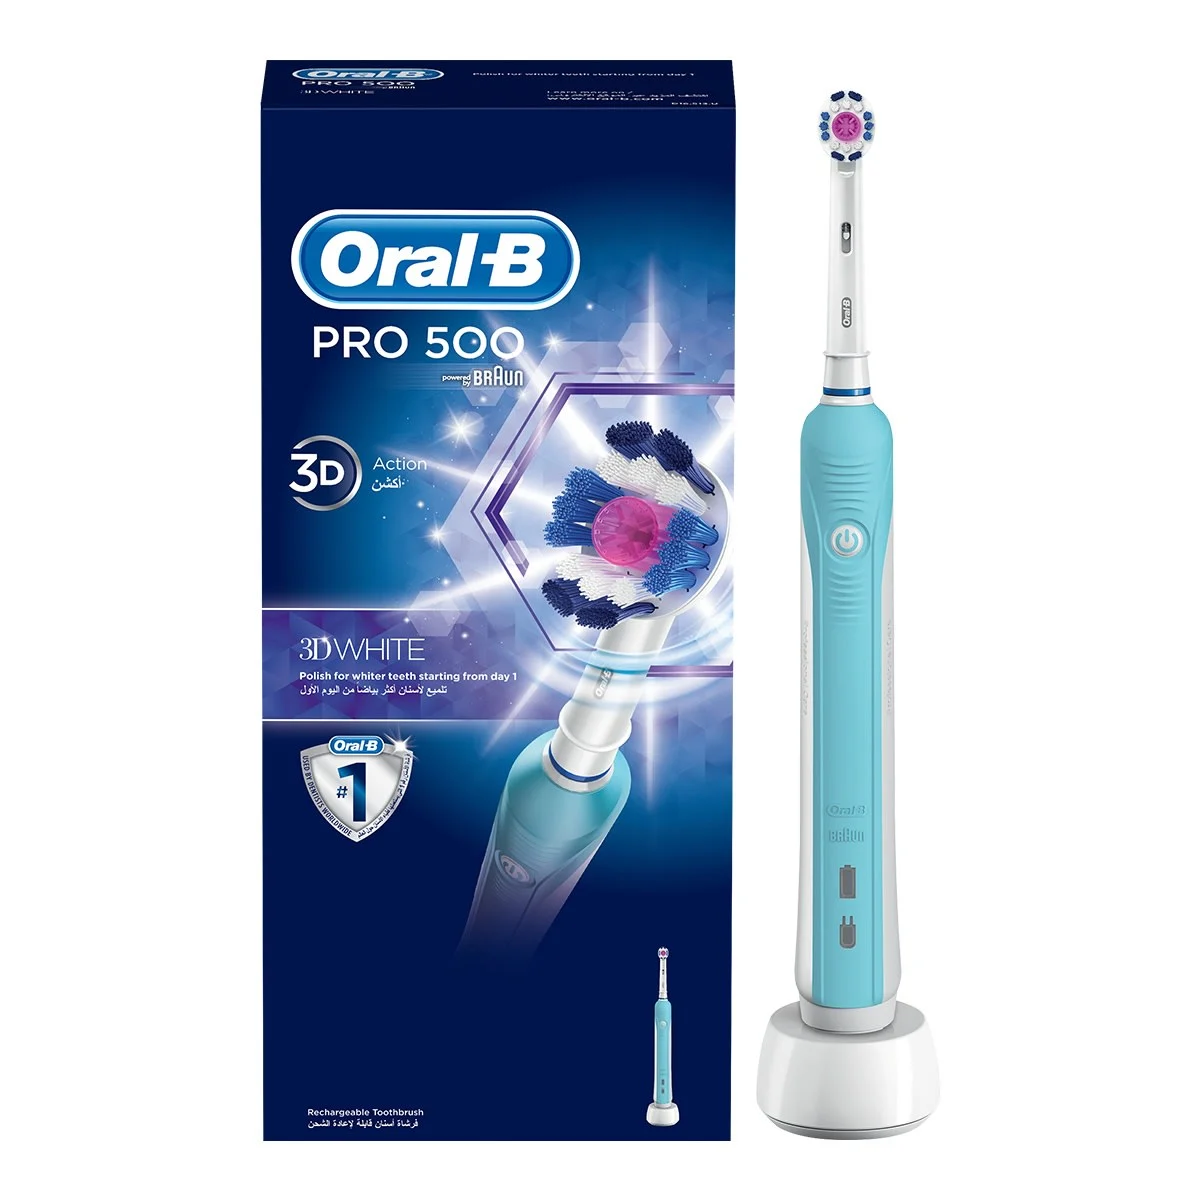 Oral-B Pro 500 3D White electric toothbrush 